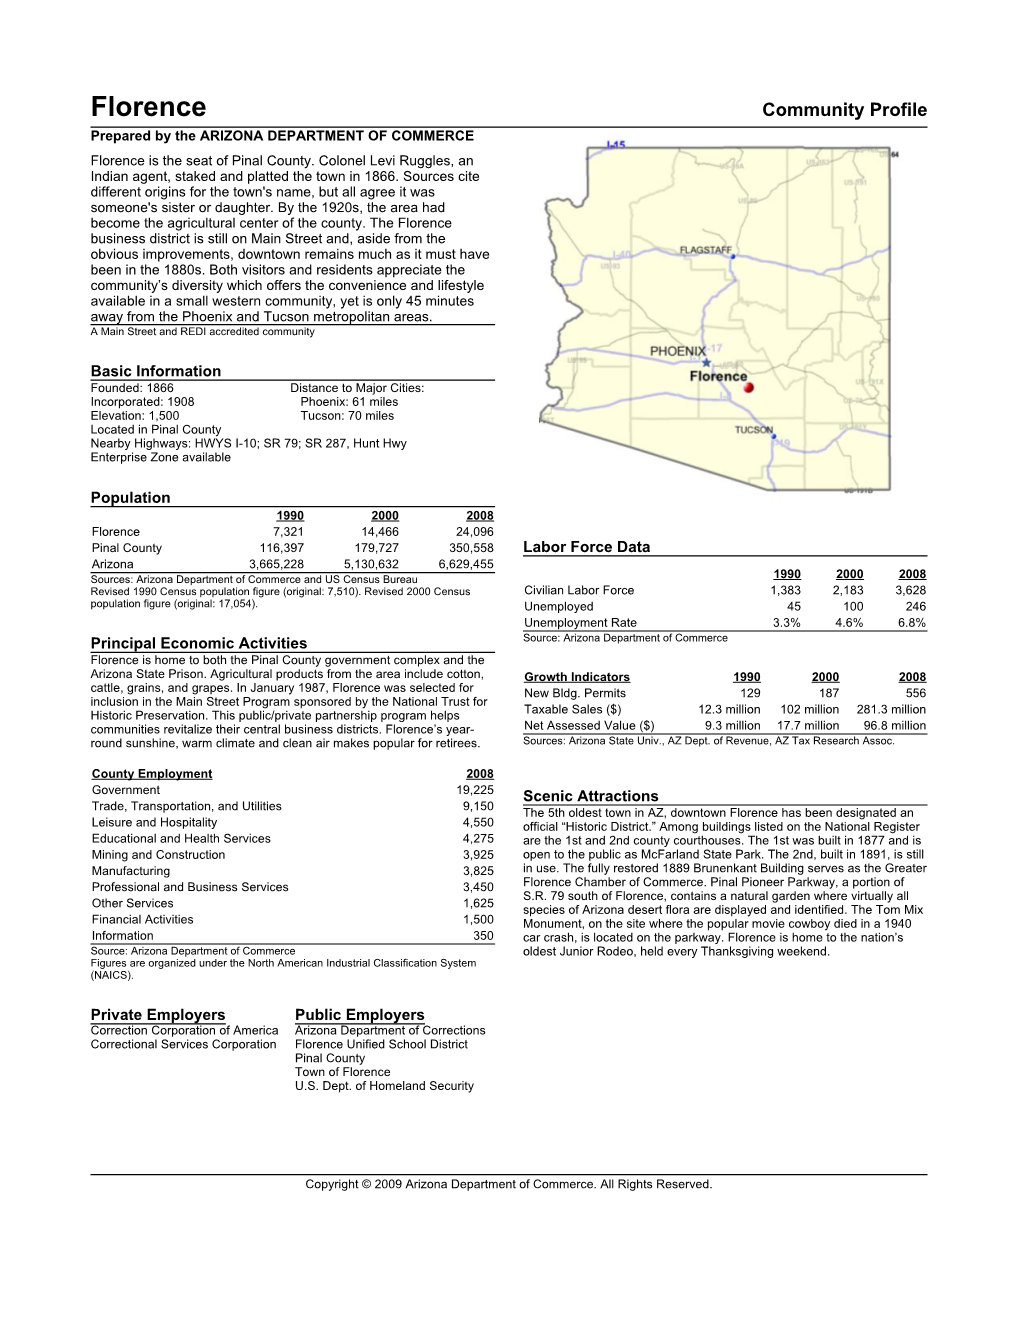 Florence Community Profile Prepared by the ARIZONA DEPARTMENT of COMMERCE Florence Is the Seat of Pinal County